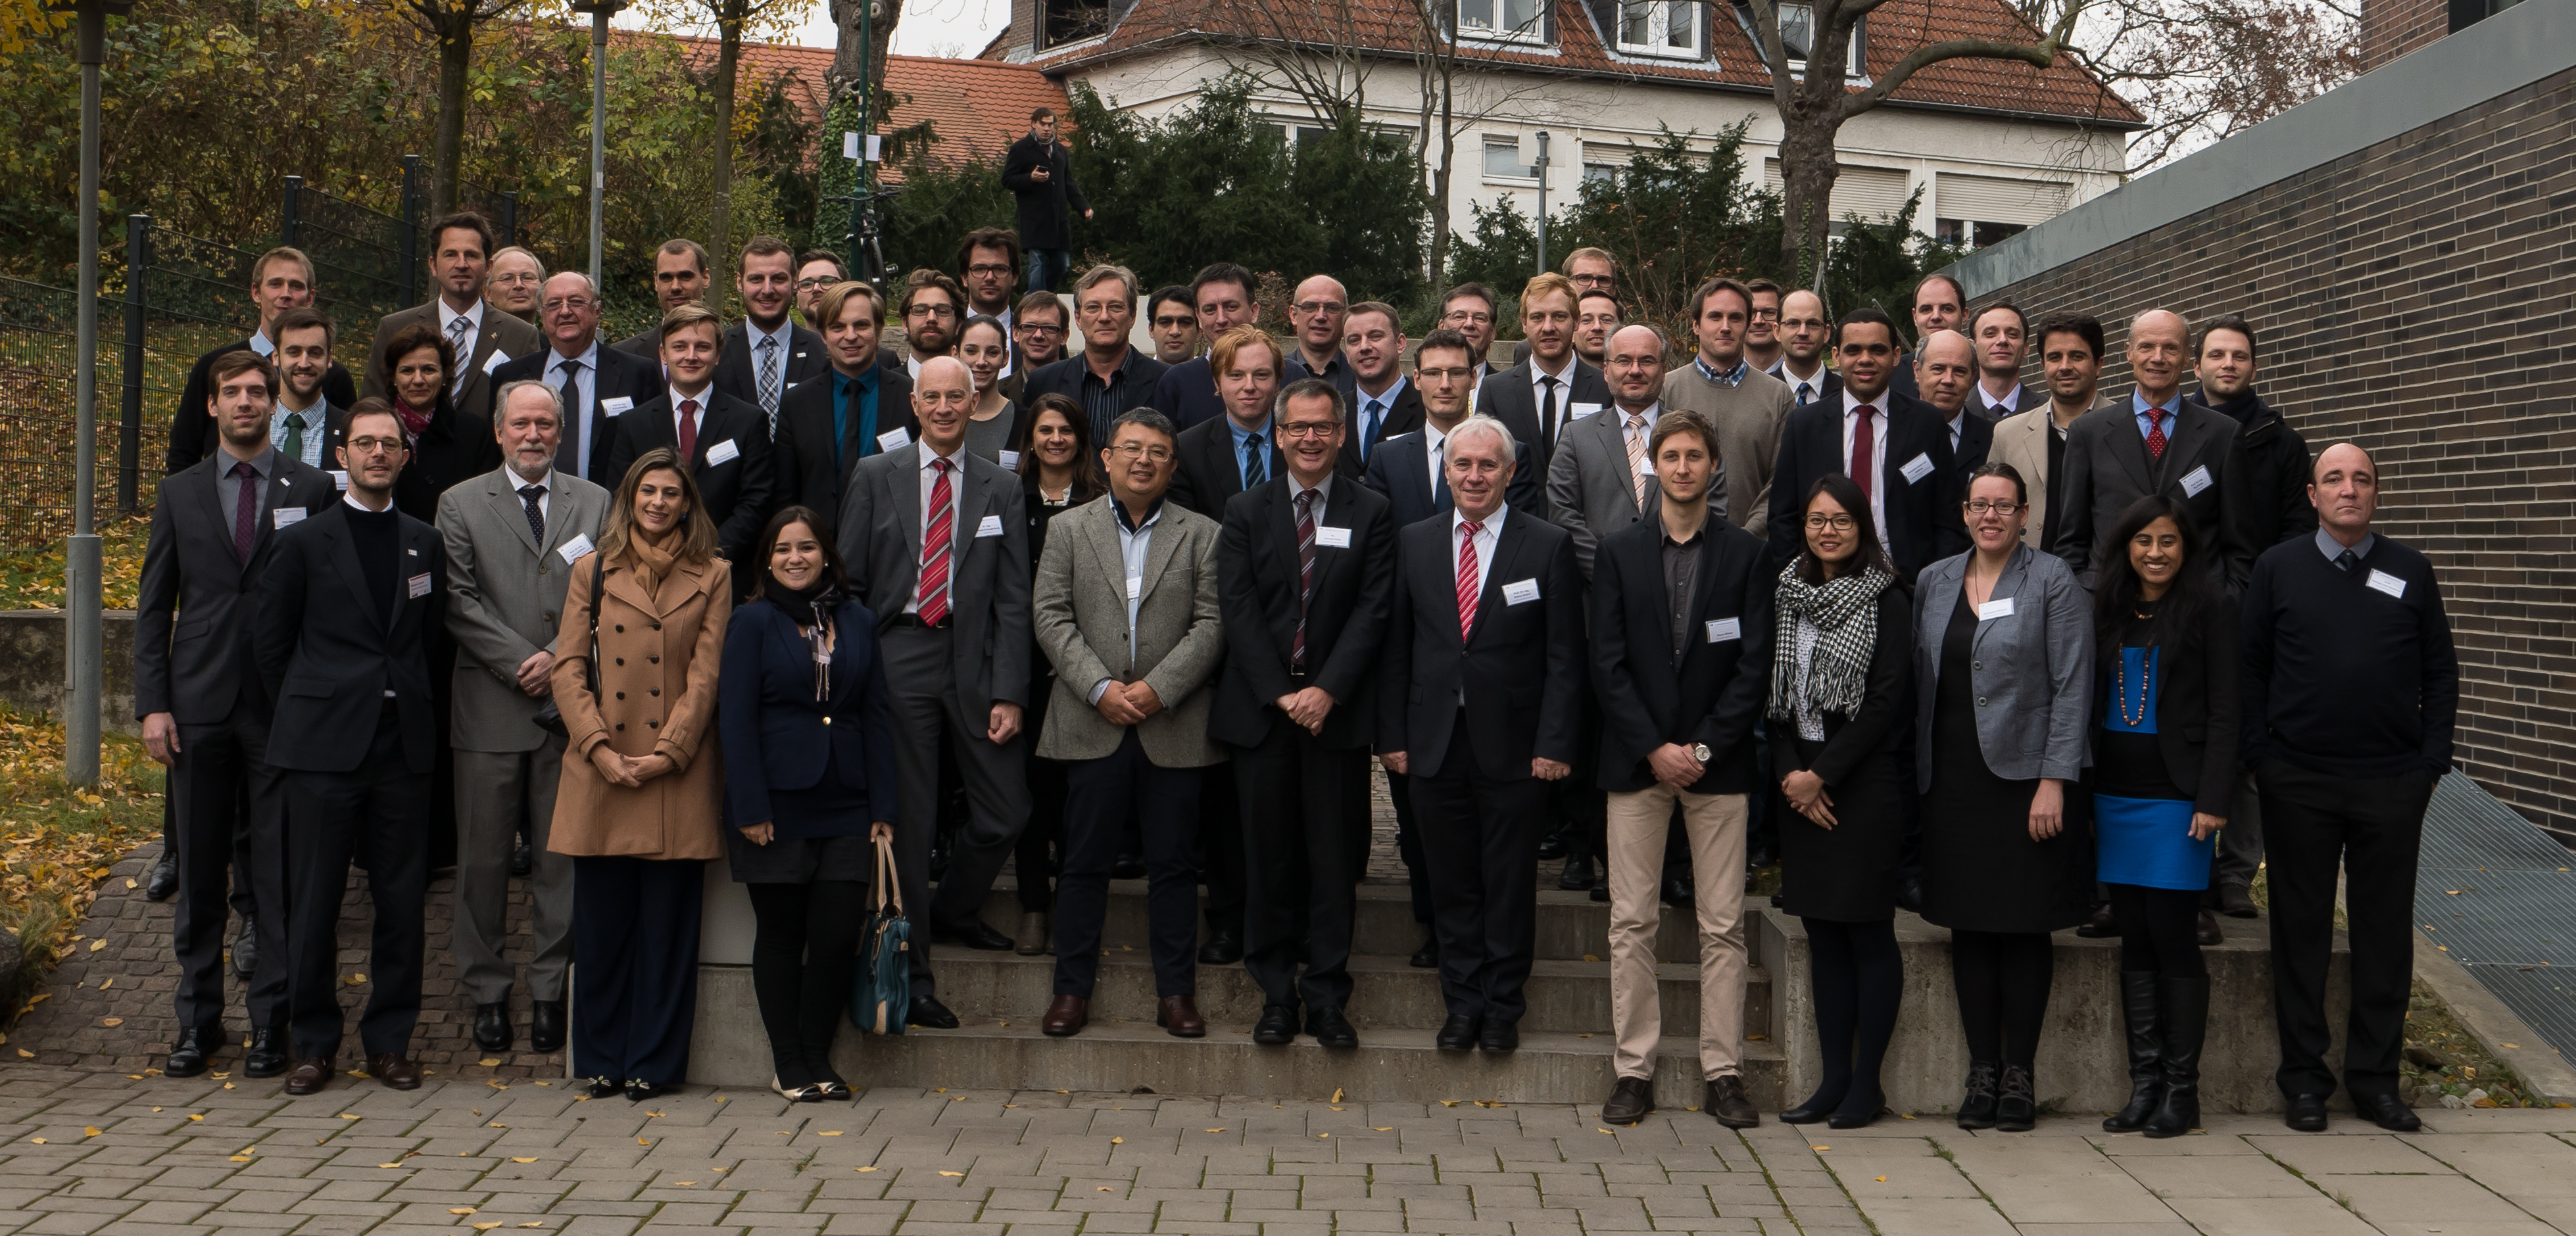 Delegates at the 6th annual meeting of BRAGECRIM in Darmstadt